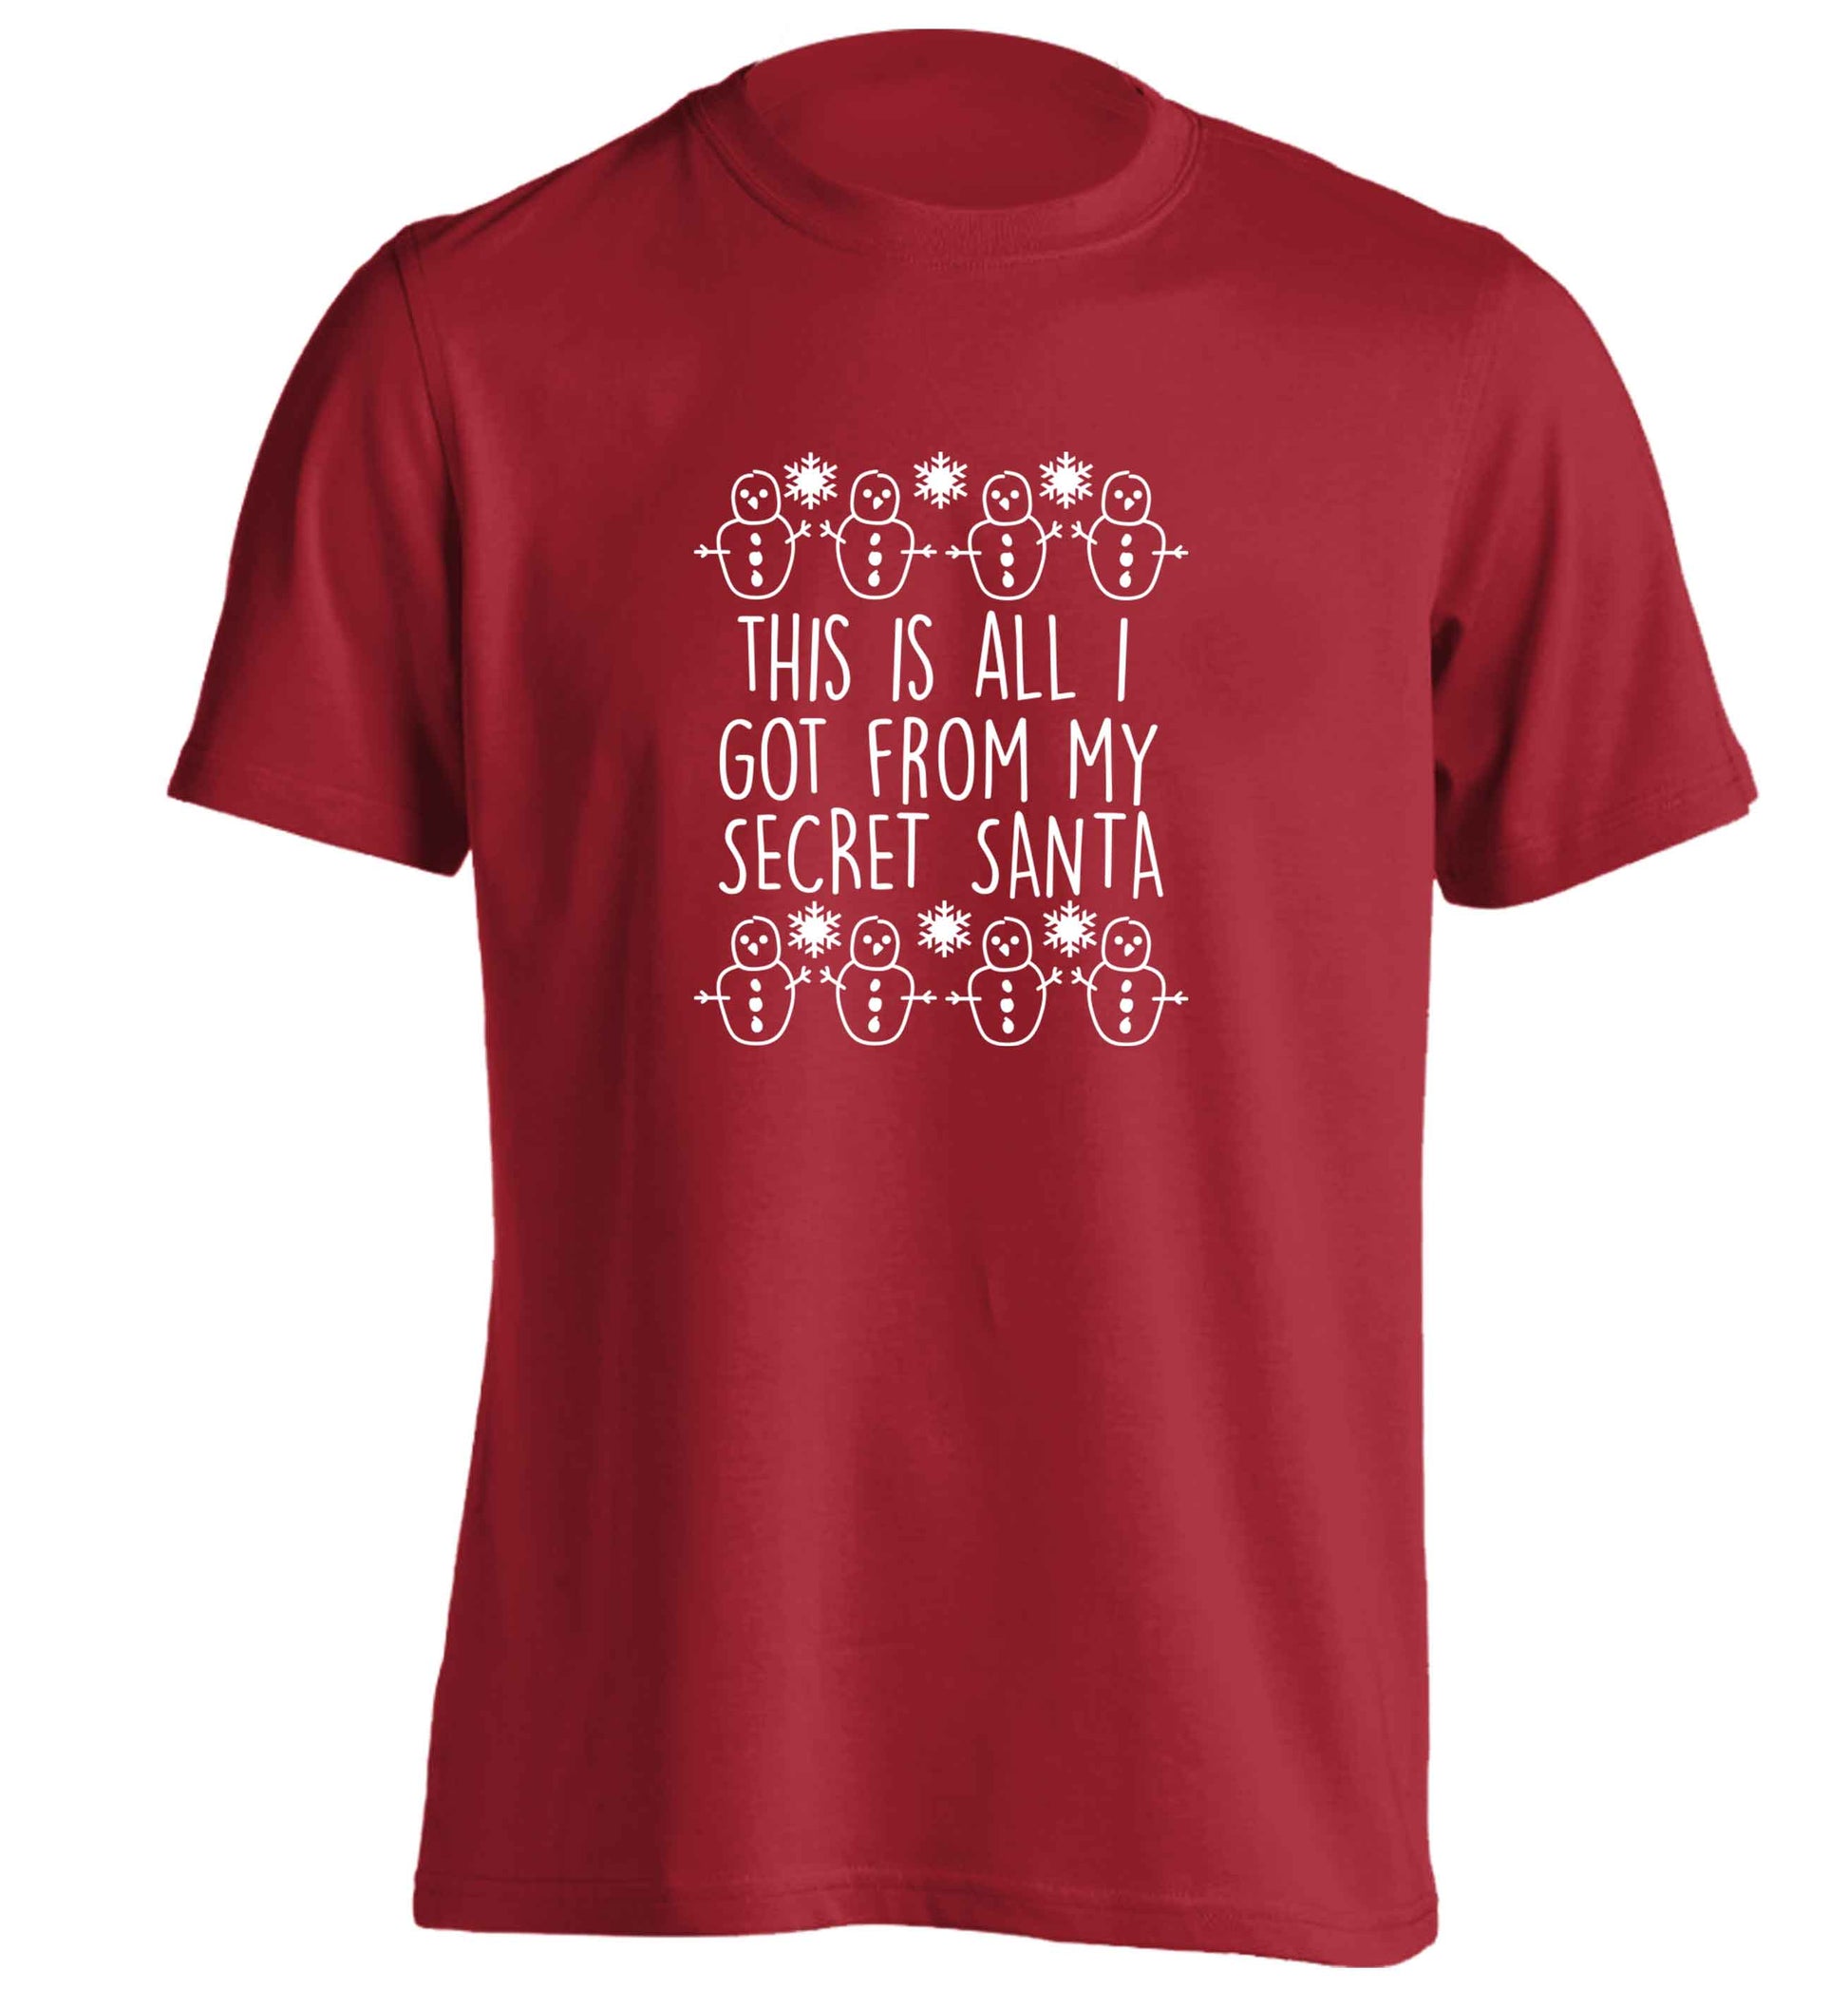 This is all I got from my secret Santa adults unisex red Tshirt 2XL